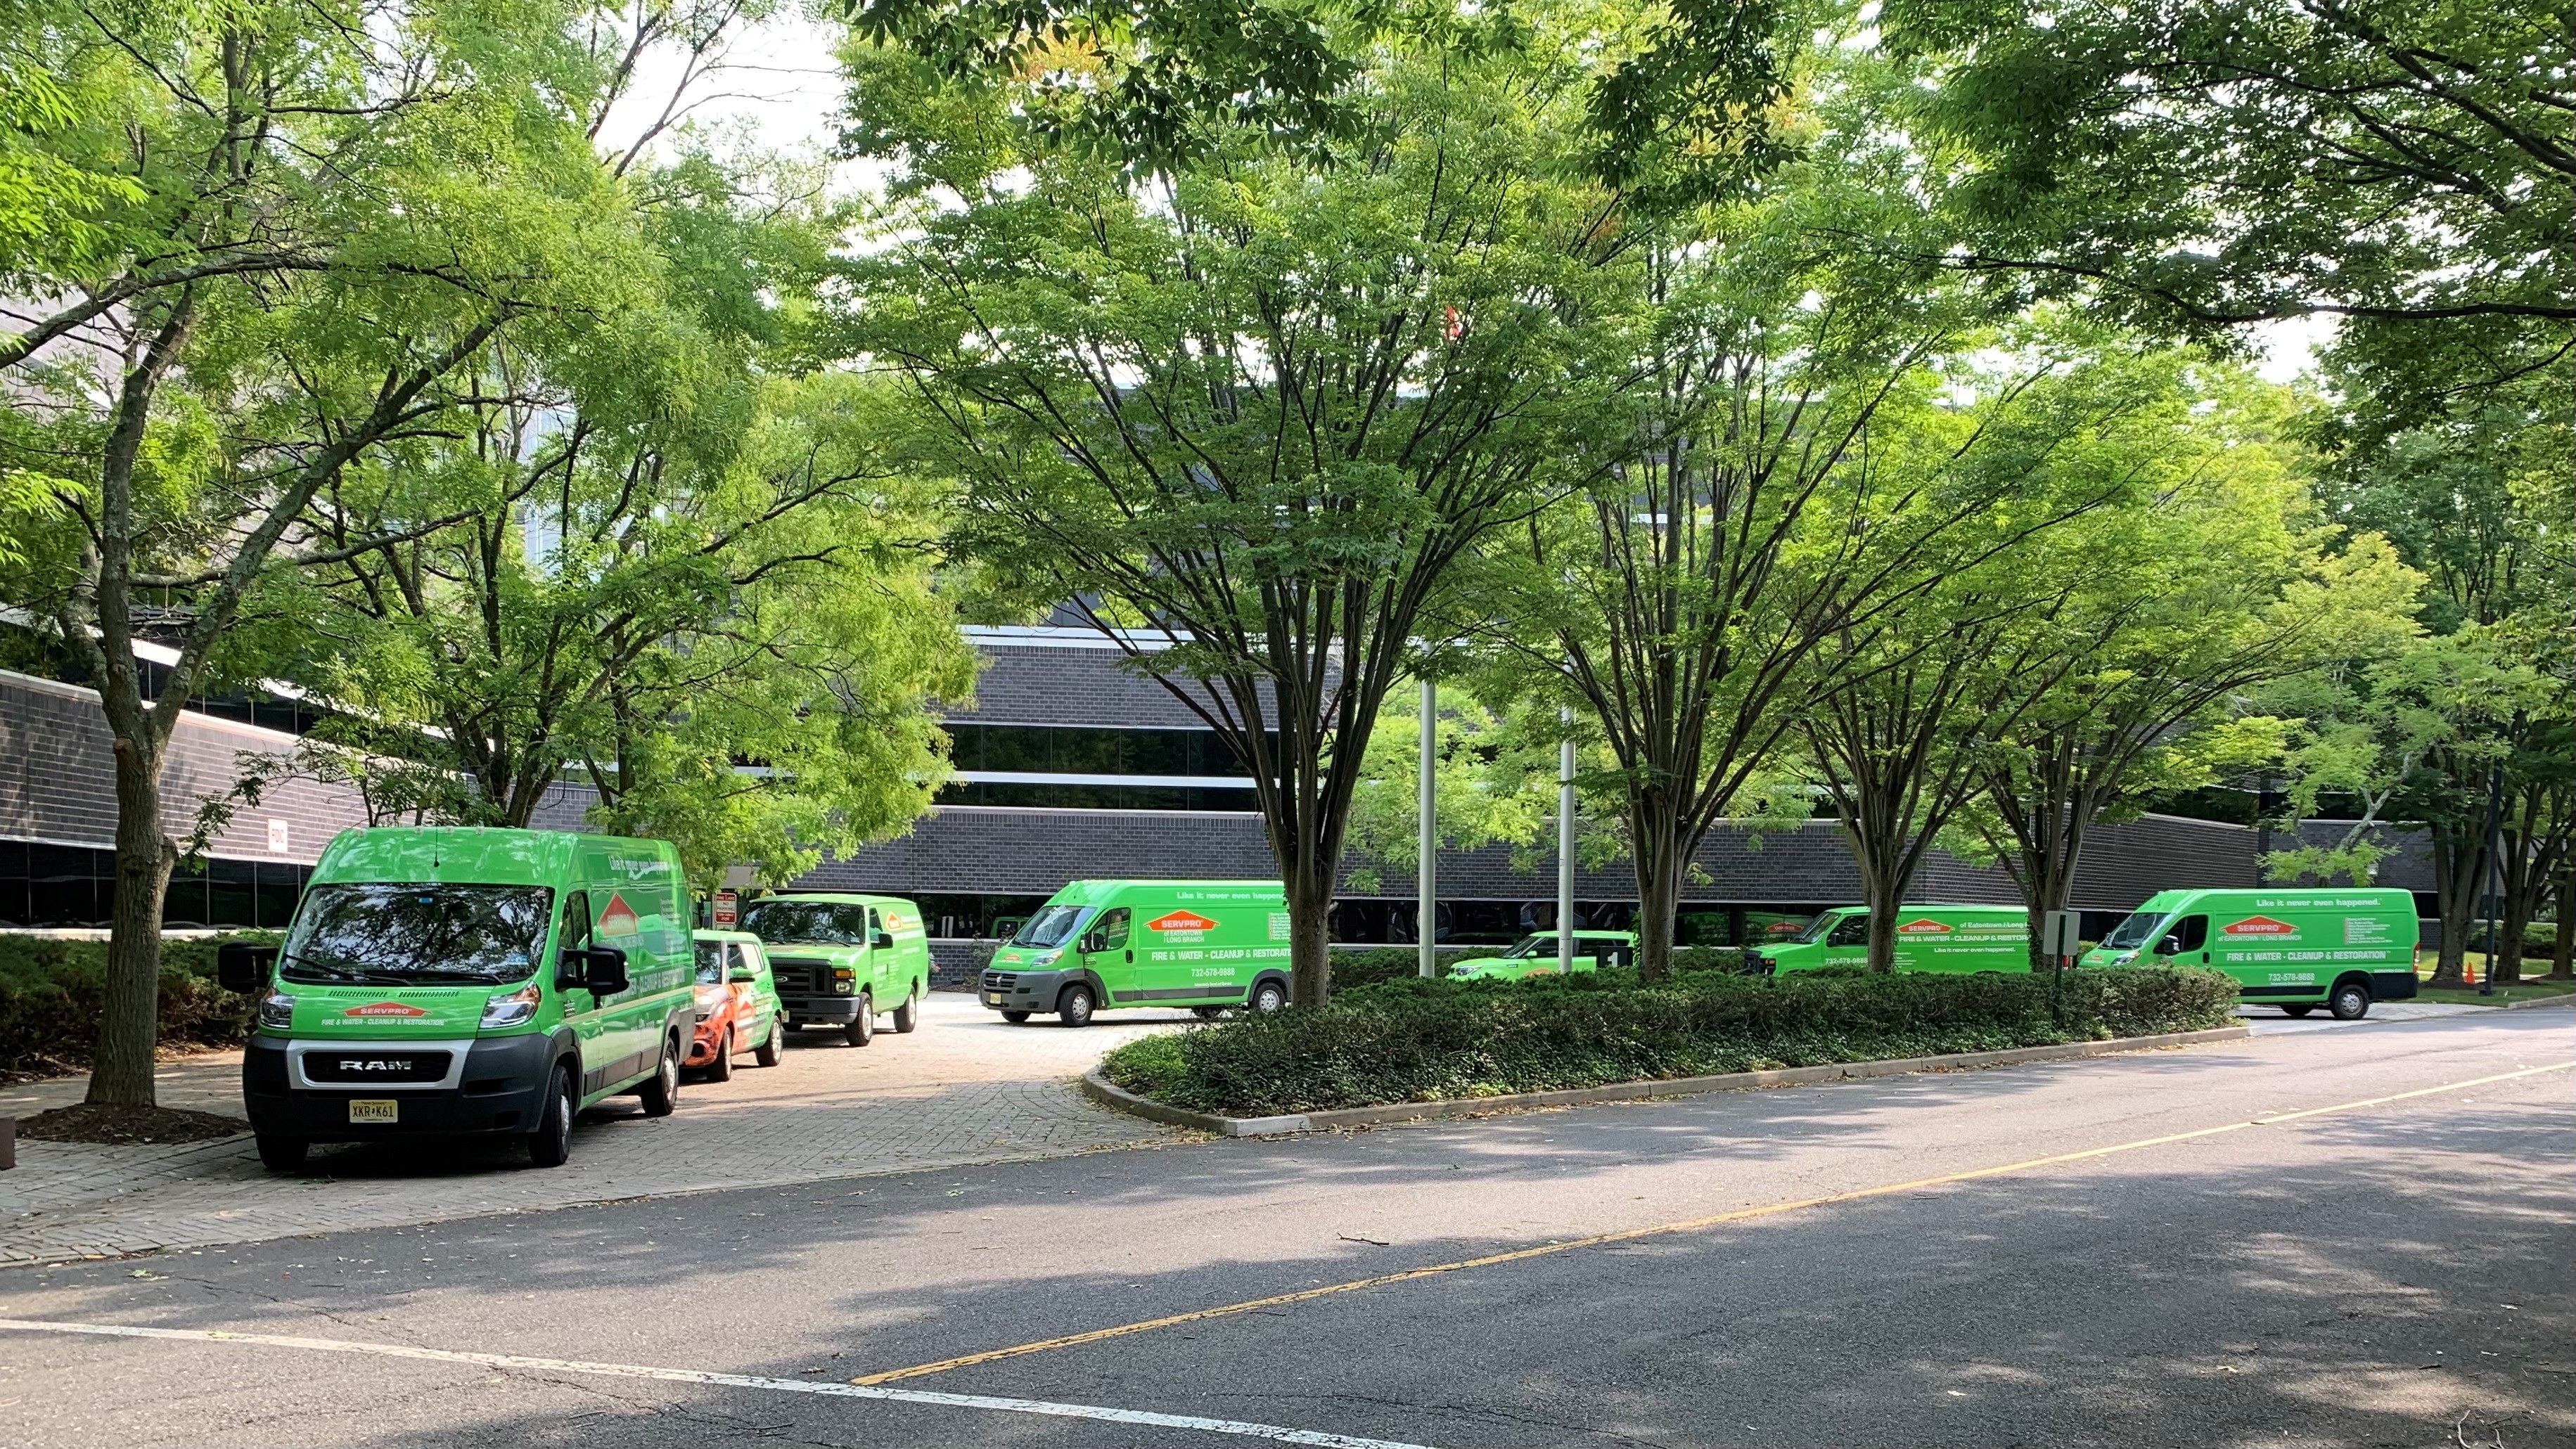 A fleet of our vans outside a job site on the weekend.